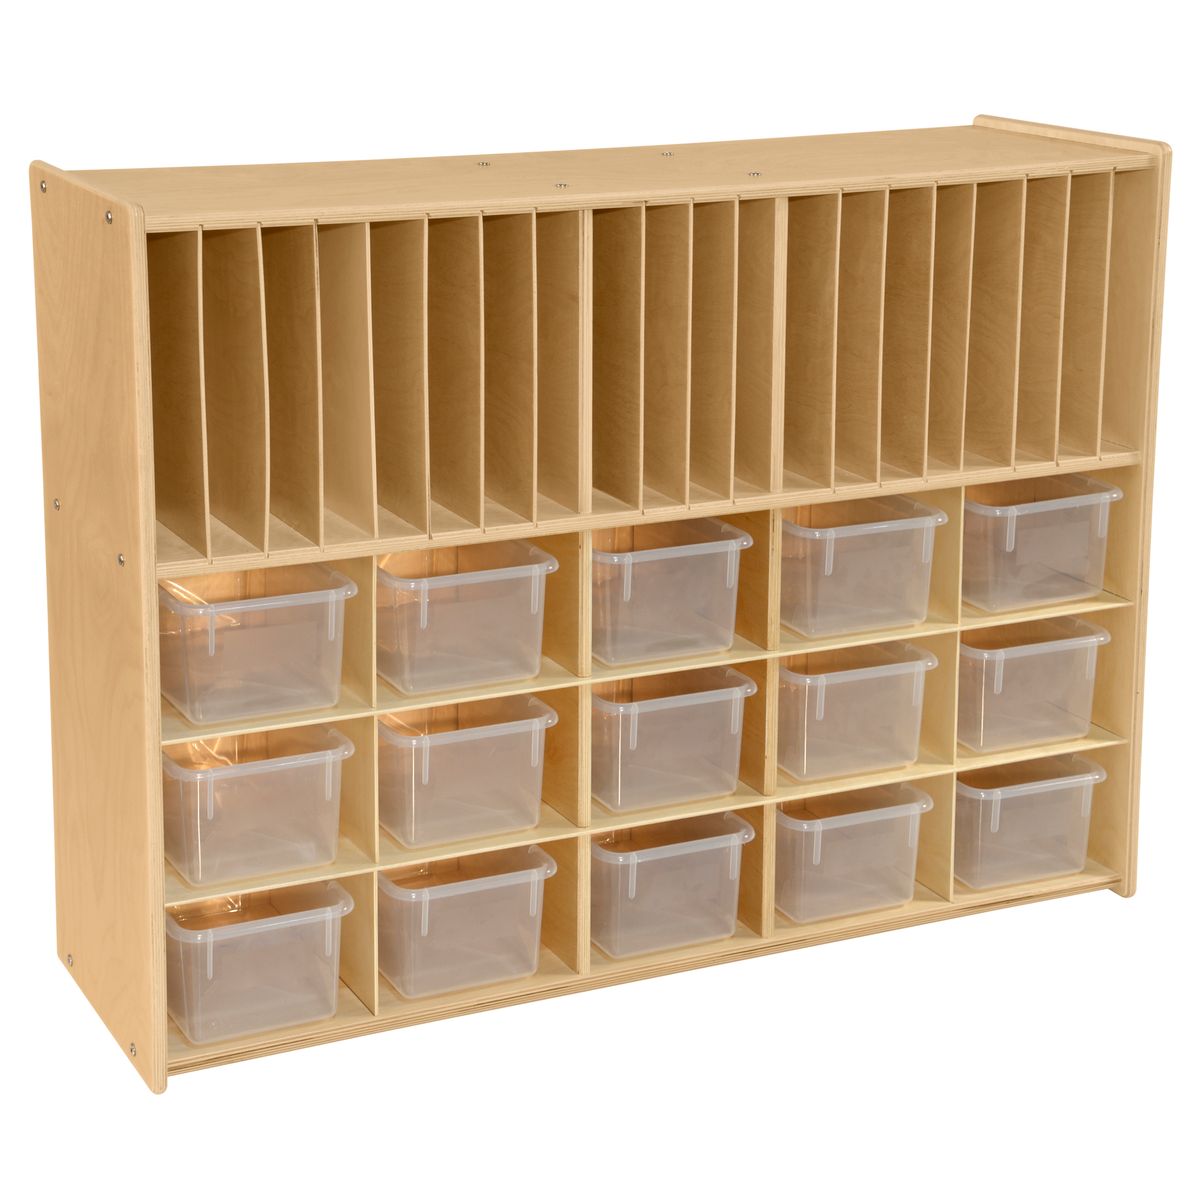 C990326f-ct 15 Translucent Bin Cubby Storage With Paper Slots- Assembled